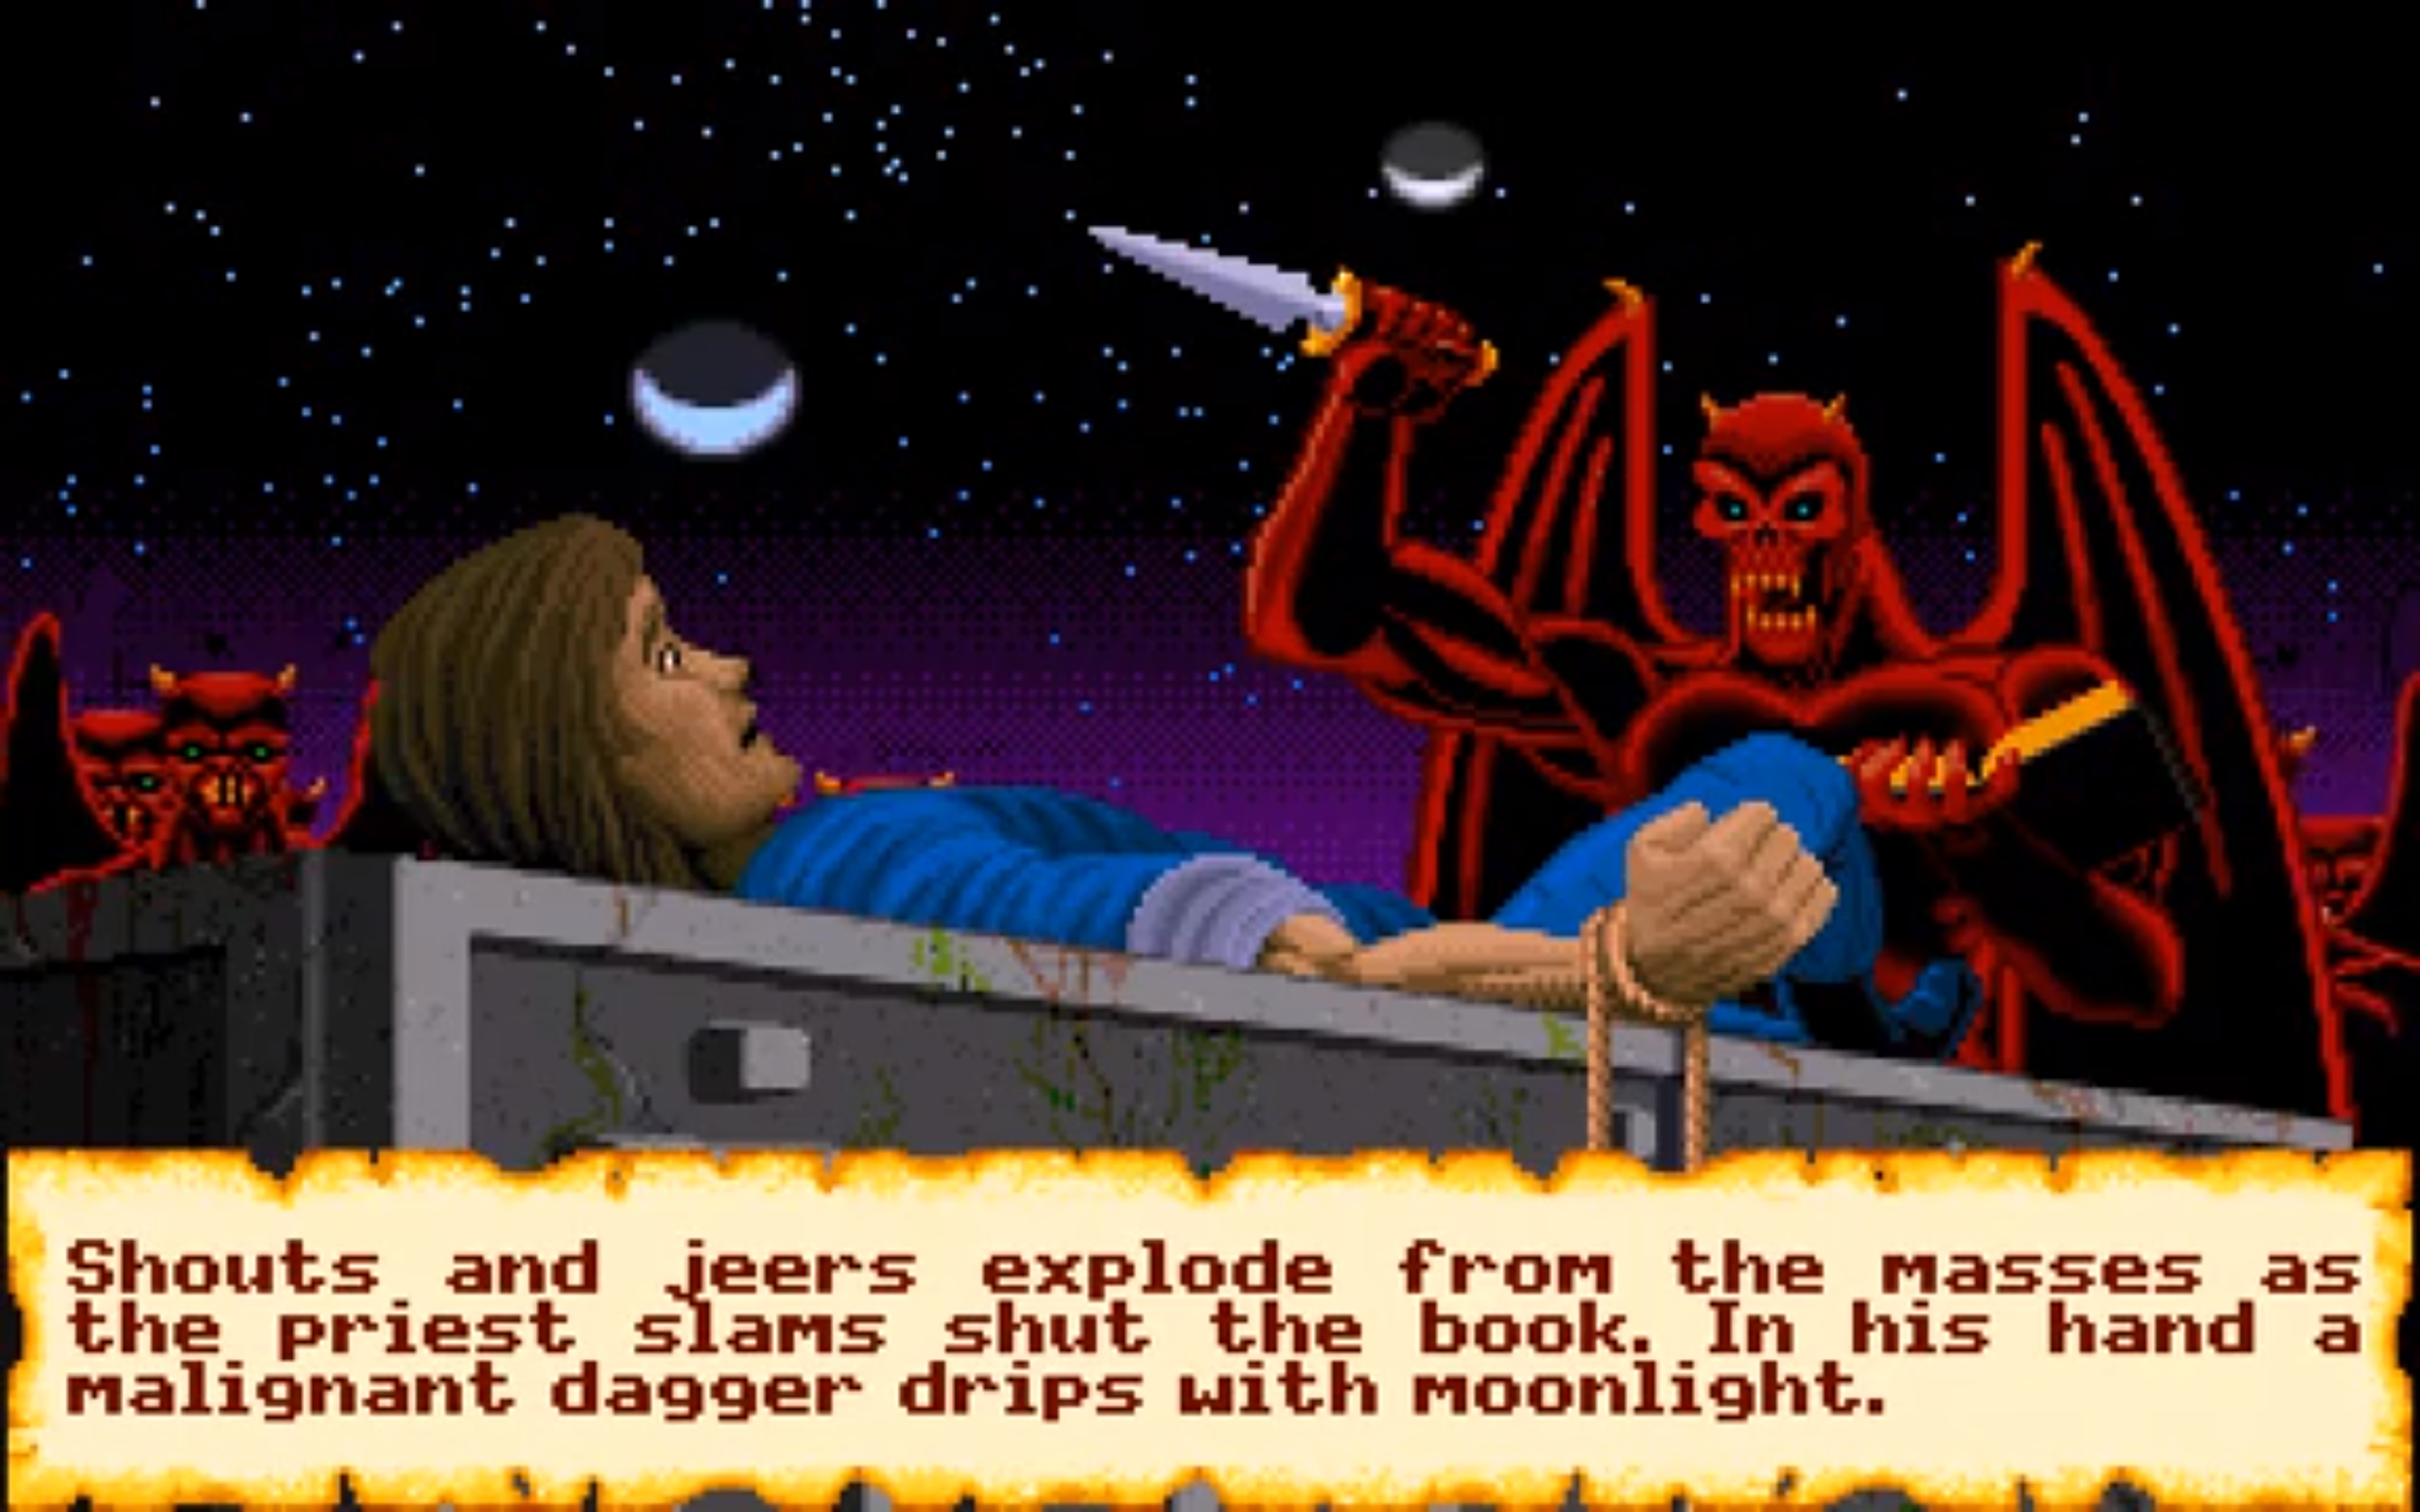 The Story Behind Ultima’s Morality